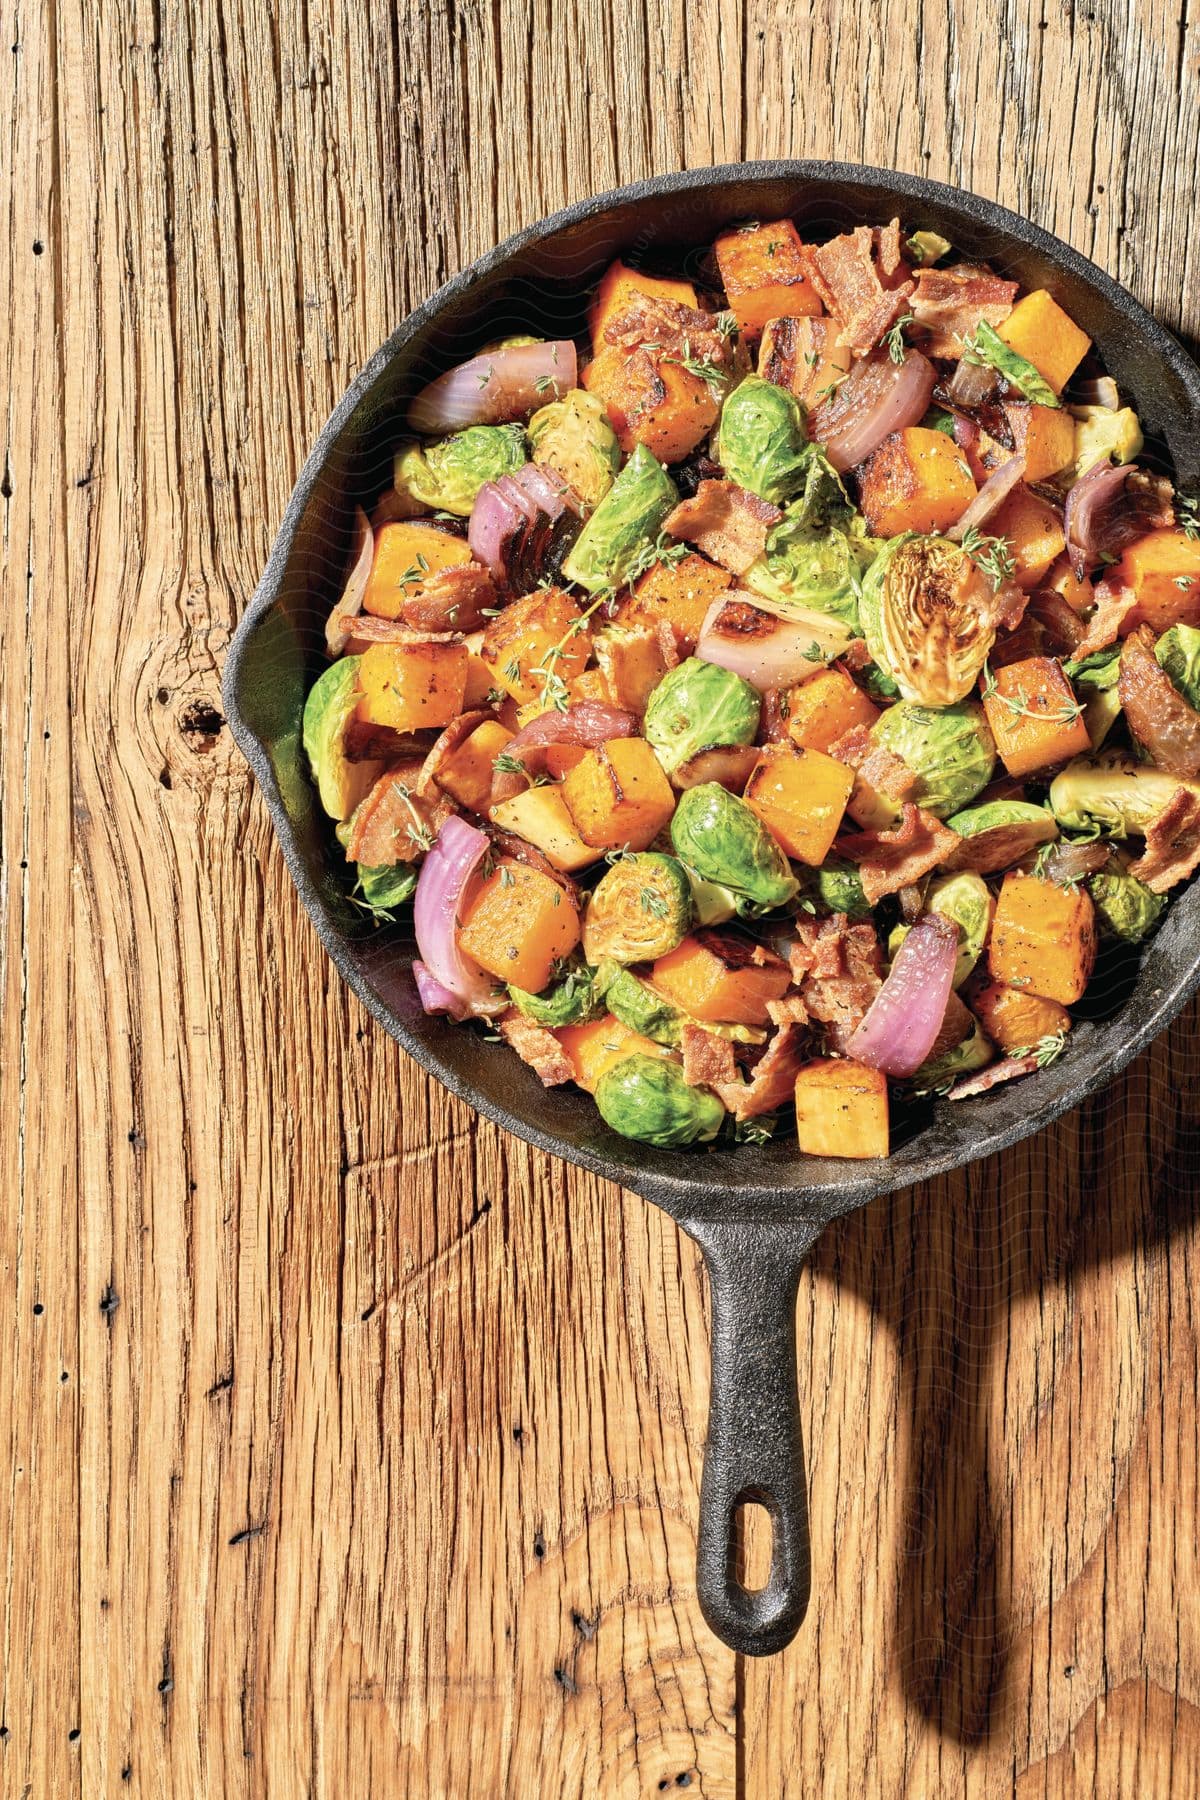 Roasted brussel sprouts and vegetables rest in a cast iron pan